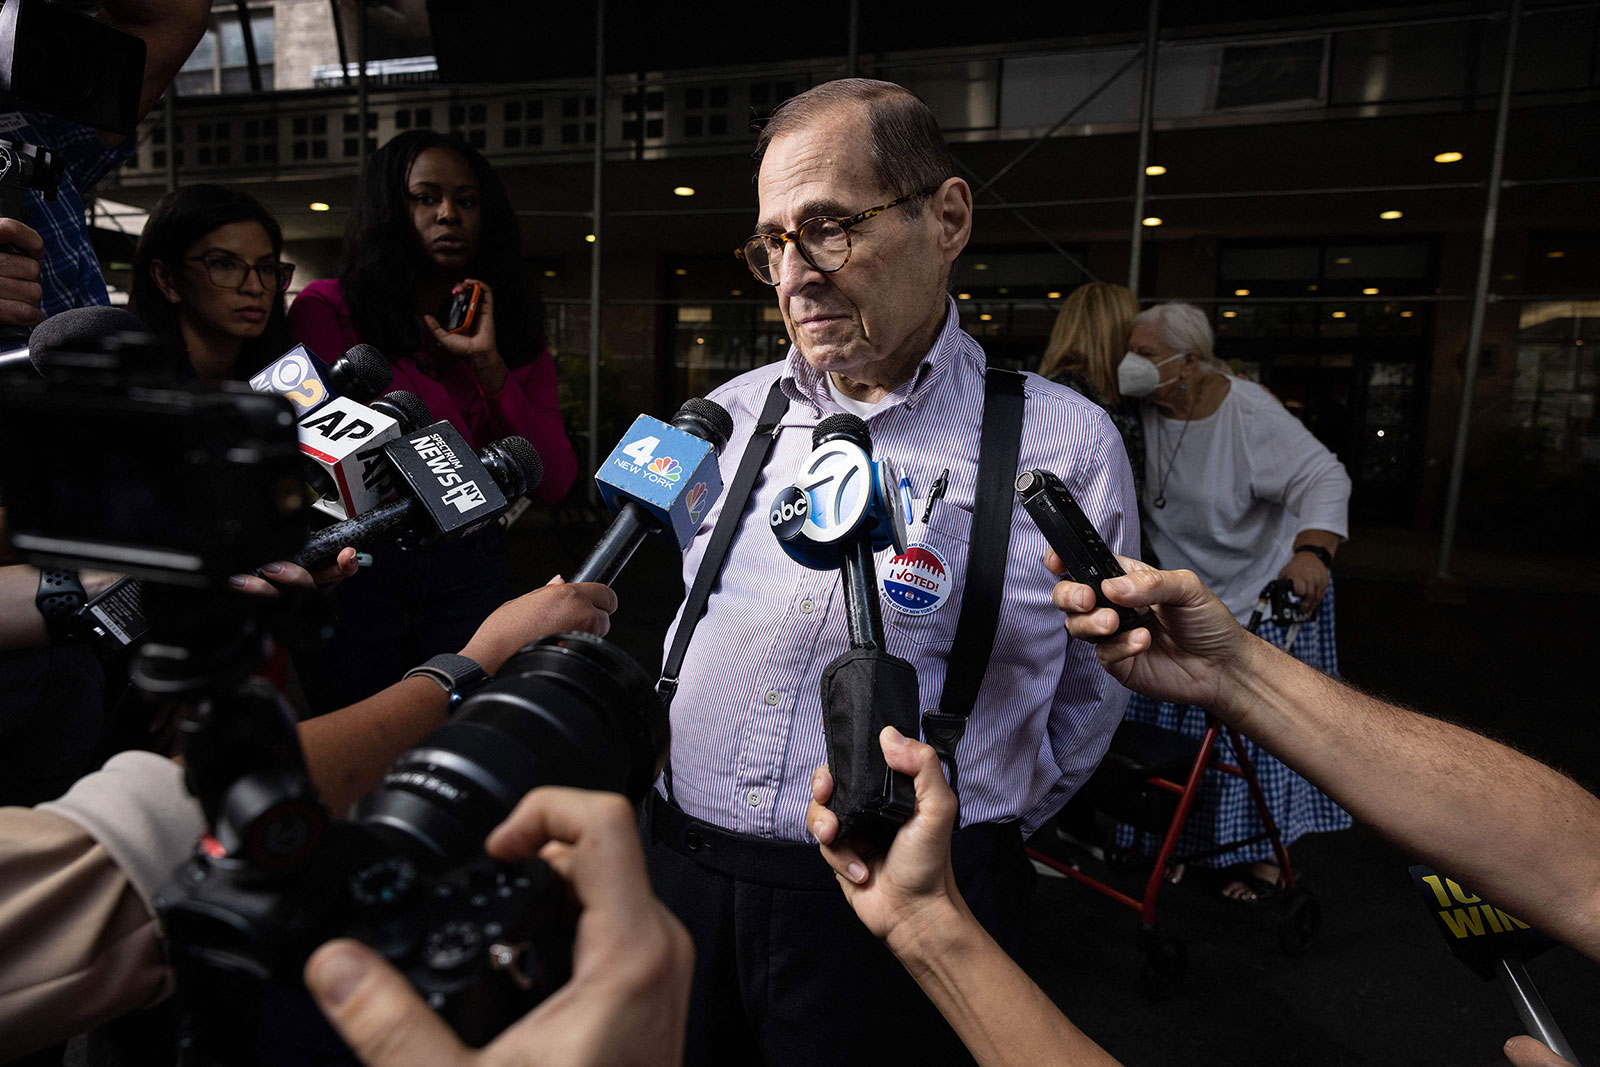 Representative Jerry Nadler will win the Democratic nomination for New York’s 12th District